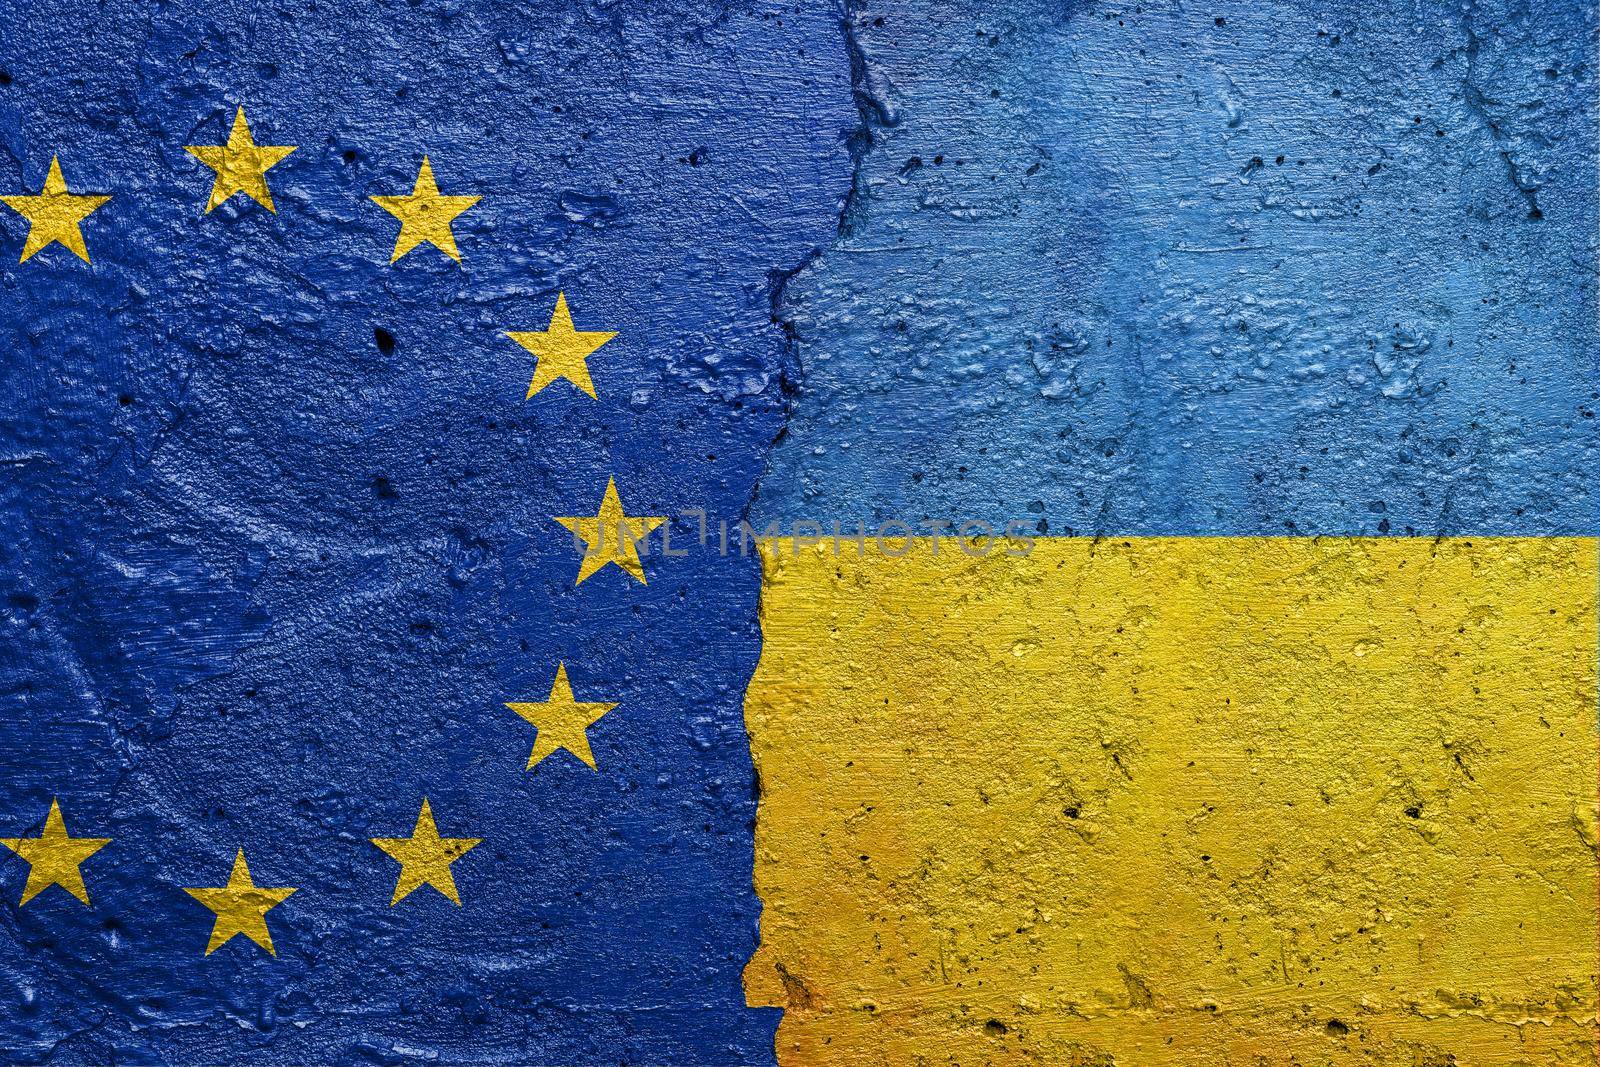 European Union and Ukraine - Cracked concrete wall painted with a EU flag on the left and a Ukrainian flag on the right